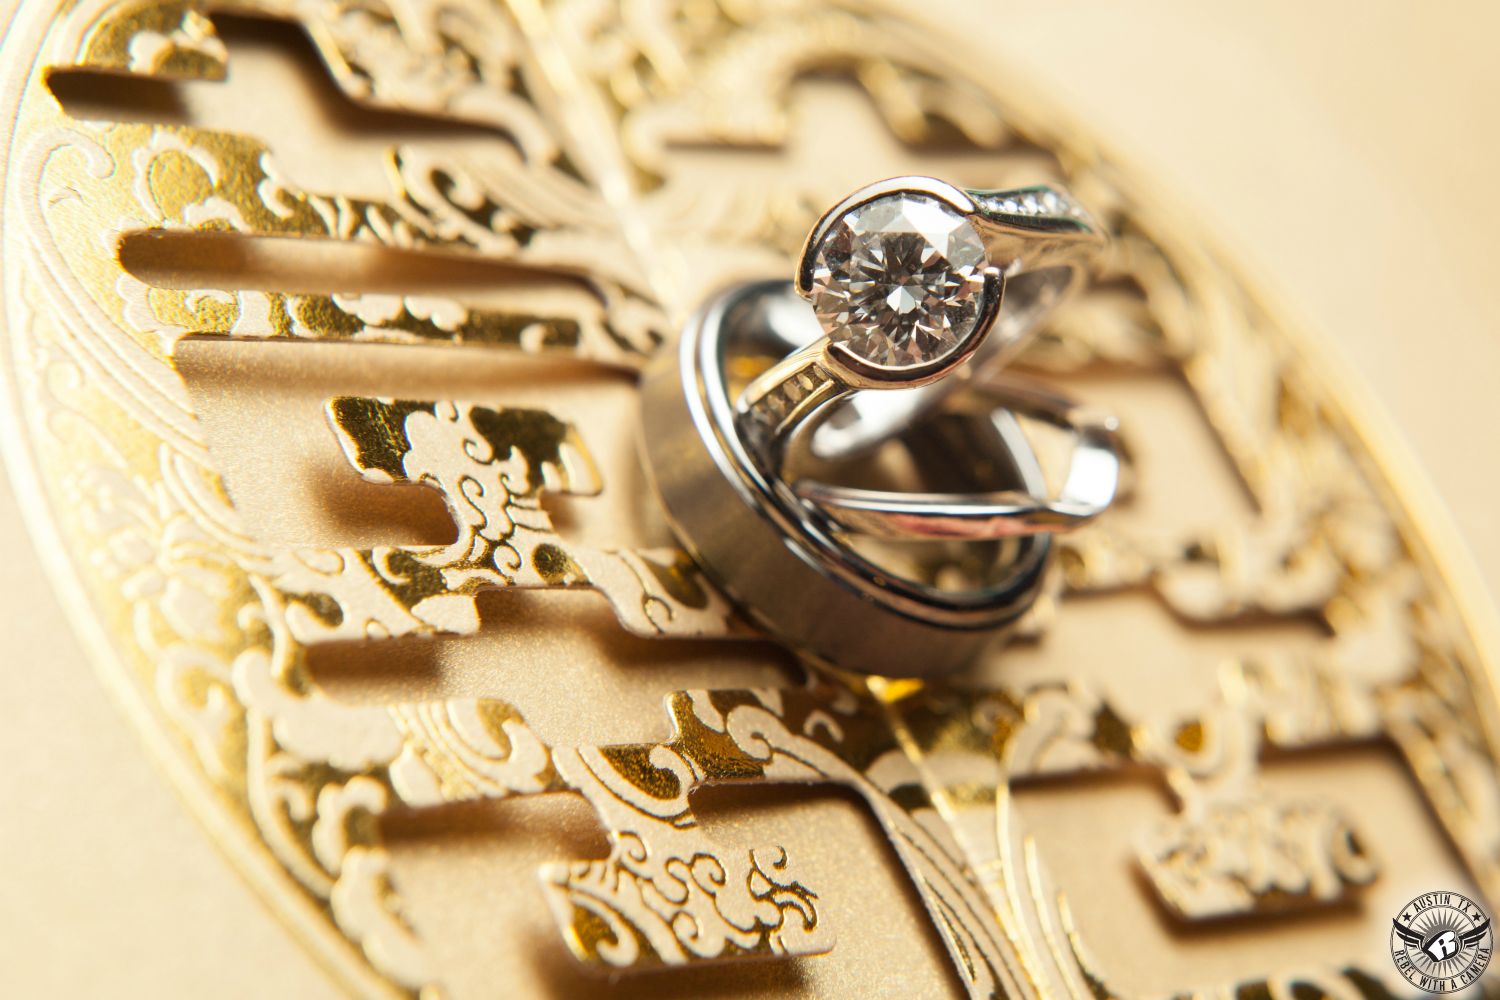 Diamond weddings rings on luxurious golden double luck Chinese character wedding invitation.